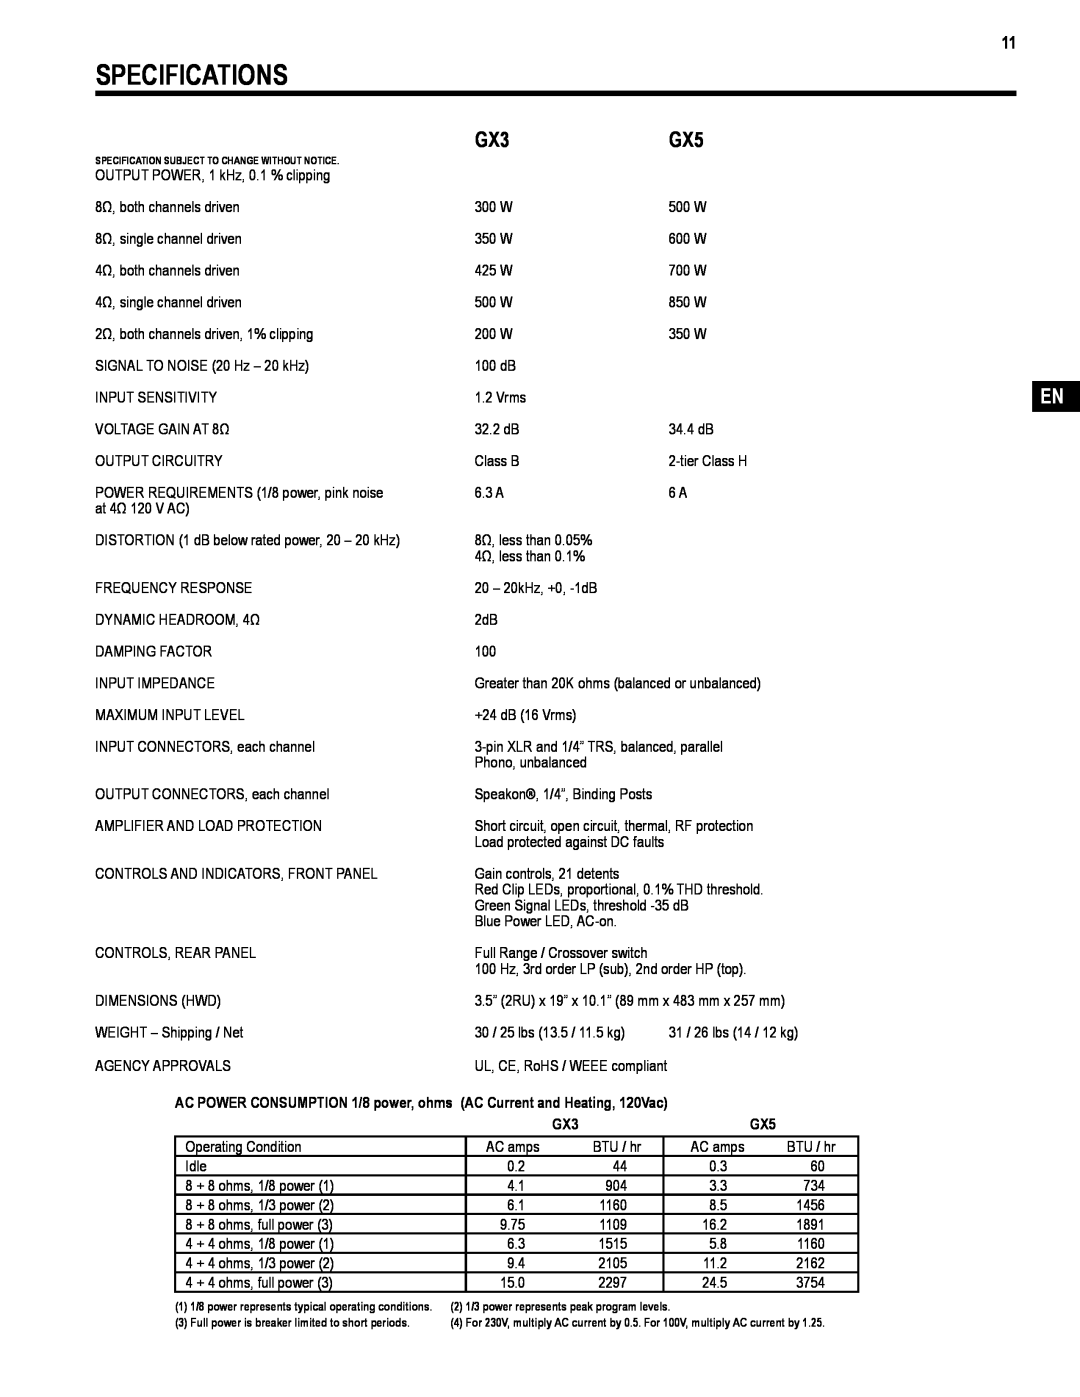 QSC Audio TD-000271-01 user manual Specifications, GX3GX5 